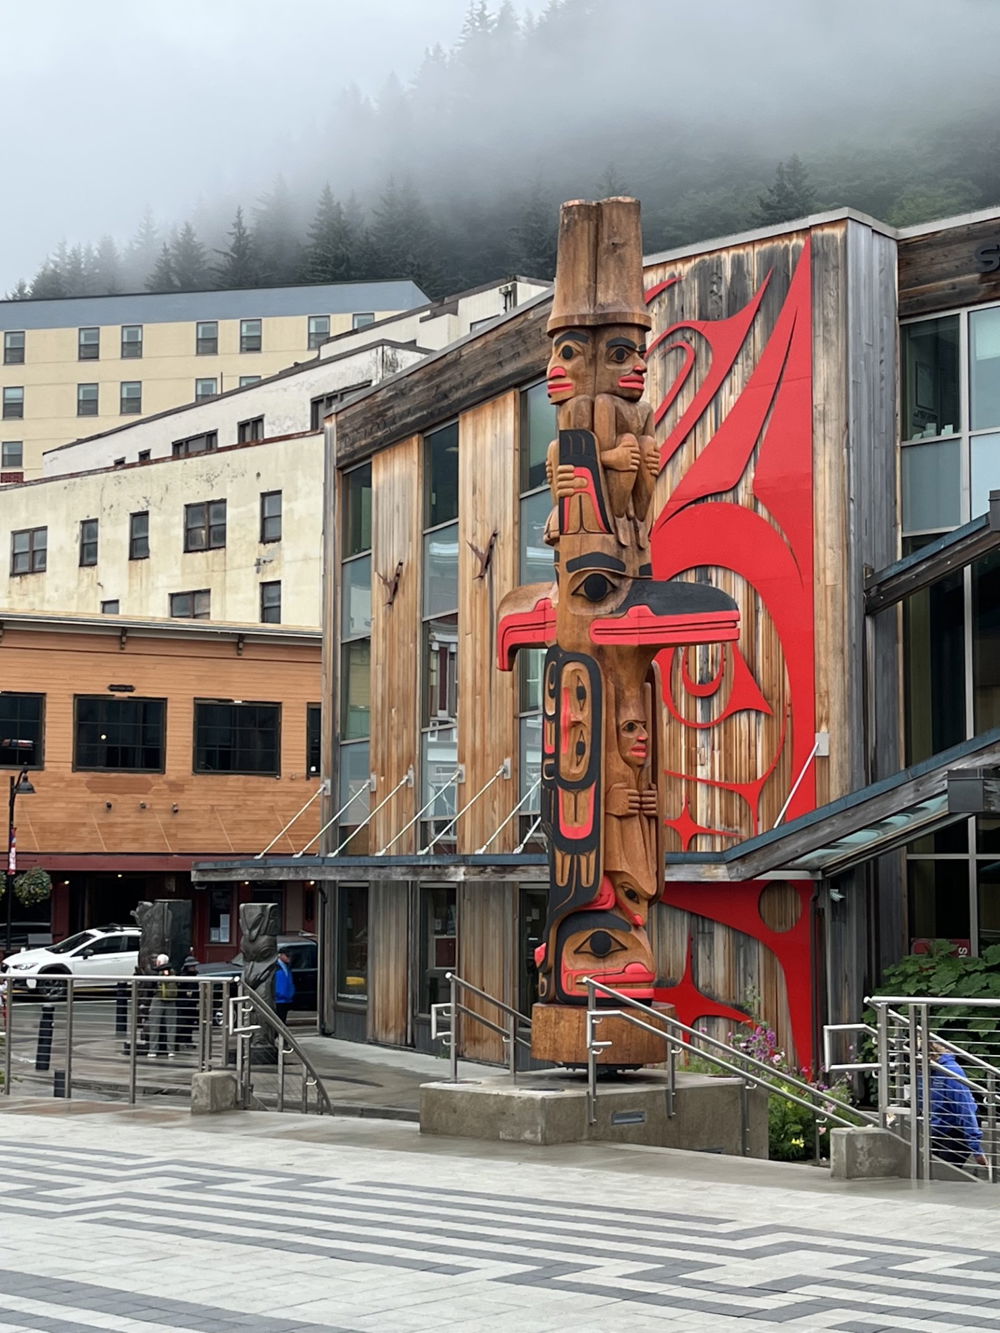 A tall totem pole in an urban setting on a foggy day. The long wooden pole is ornately carved with a cast of stylized characters. Each character overlaps one another and is painted in a color palette of red and black.